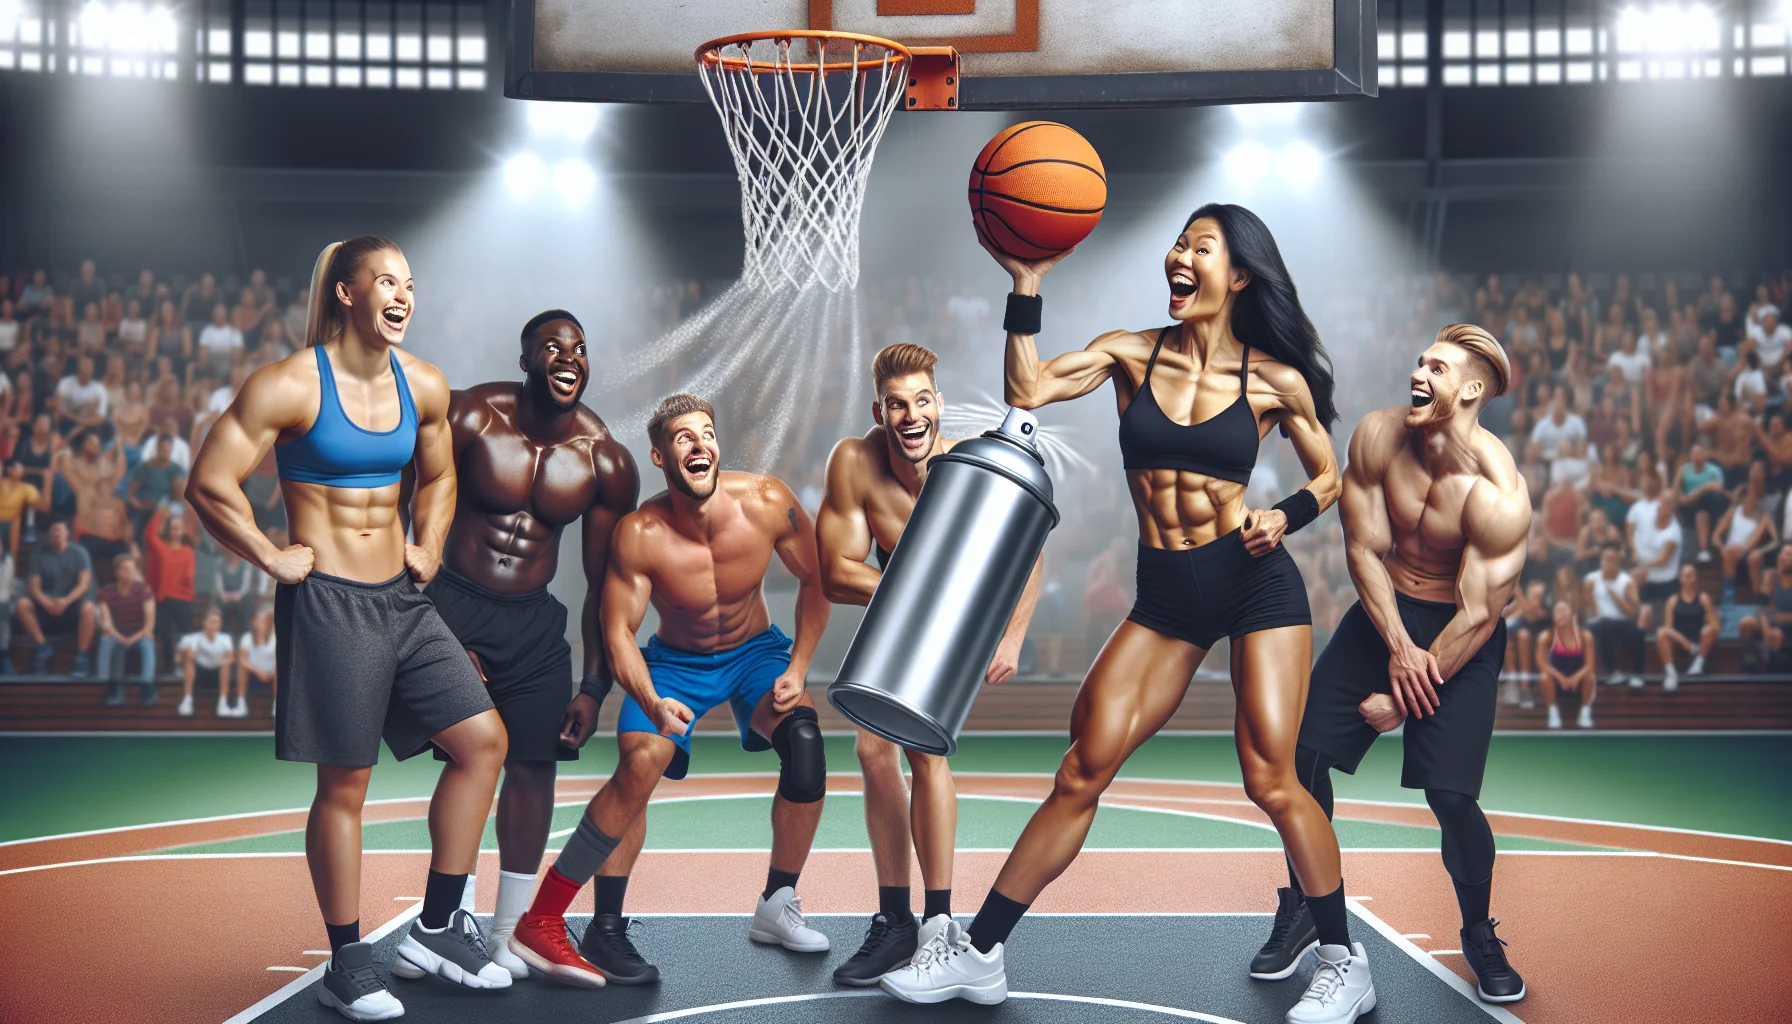 Create a vibrant image of a basketball court, where a muscular South Asian female athlete energetically shoots a hoop. Meanwhile, she holds a canister of magnesium spray deodorant like a microphone, as if entertaining the crowd with a humorous infomercial. In the foreground, a group of Caucasian and black male and female athletes laugh merrily, their sports gear momentarily forgotten as they enjoy the spectacle. They seem charmed and curious about this 'secret weapon'. The spray canister must be the main focus, symbolizing the benefits of supplements for sports performance.